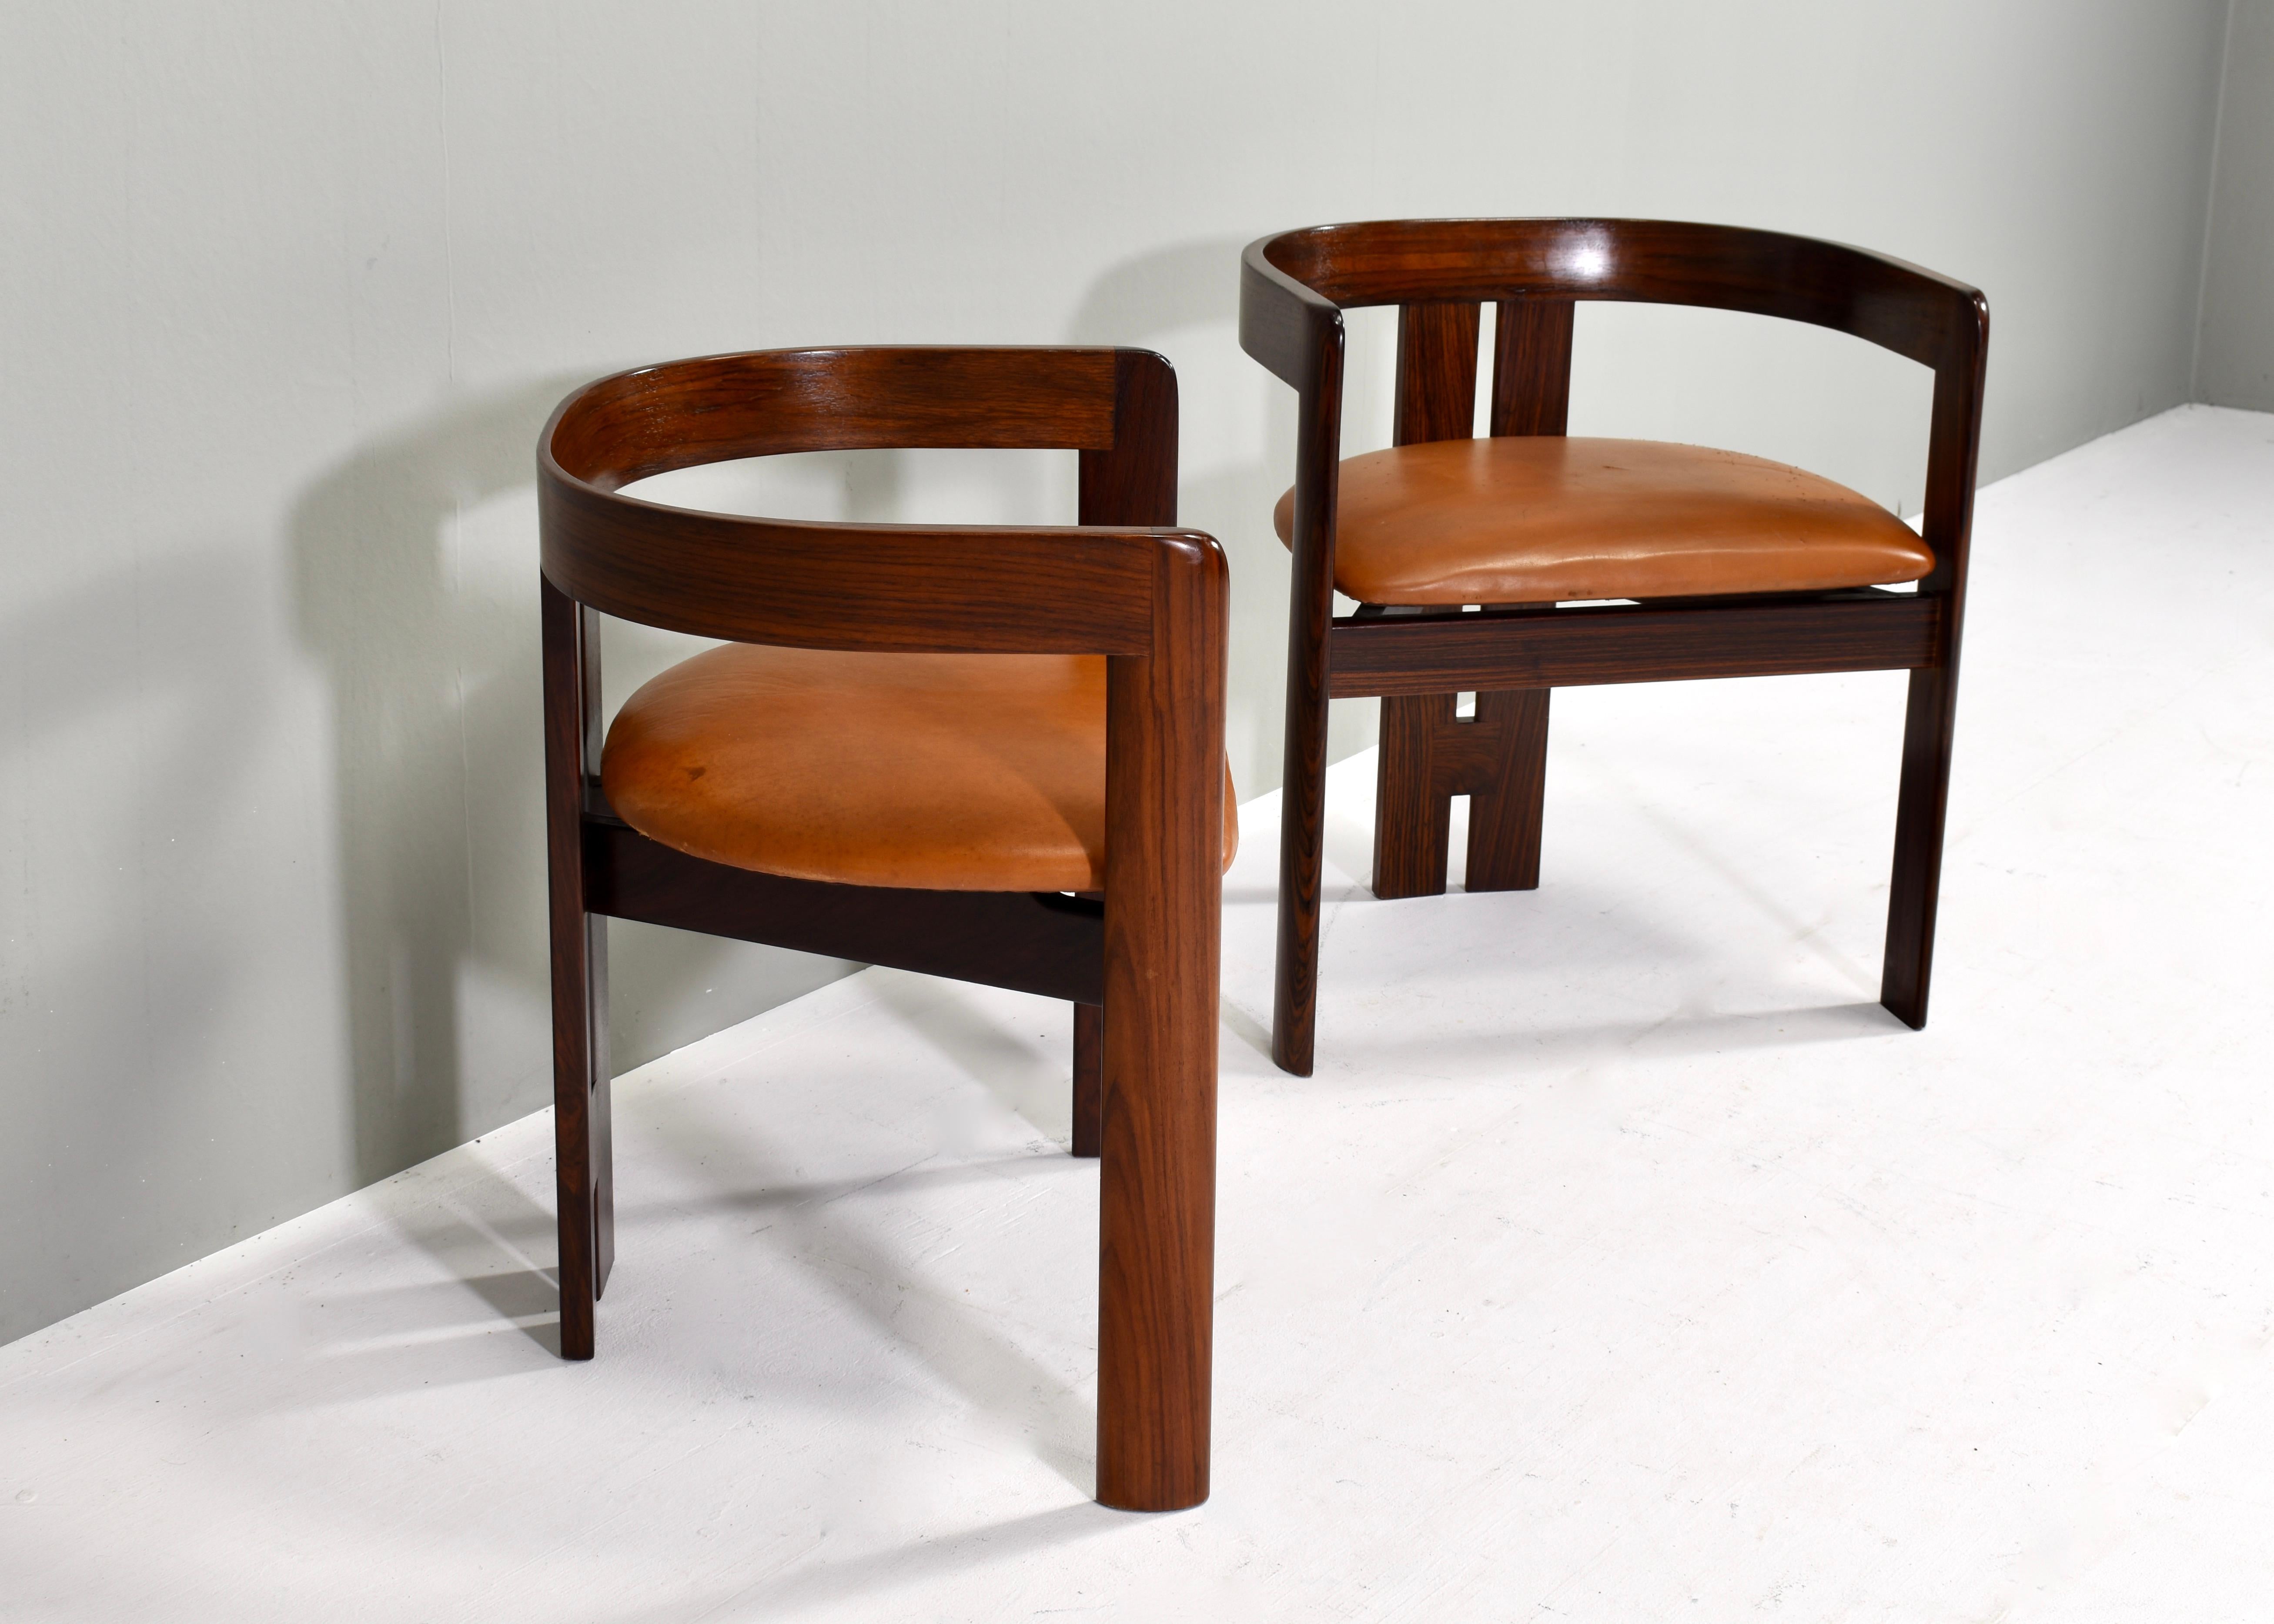 Italian Pair of Pigreco Chairs Tan Leather by Tobia Scarpa for Gavina, Italy, circa 1970